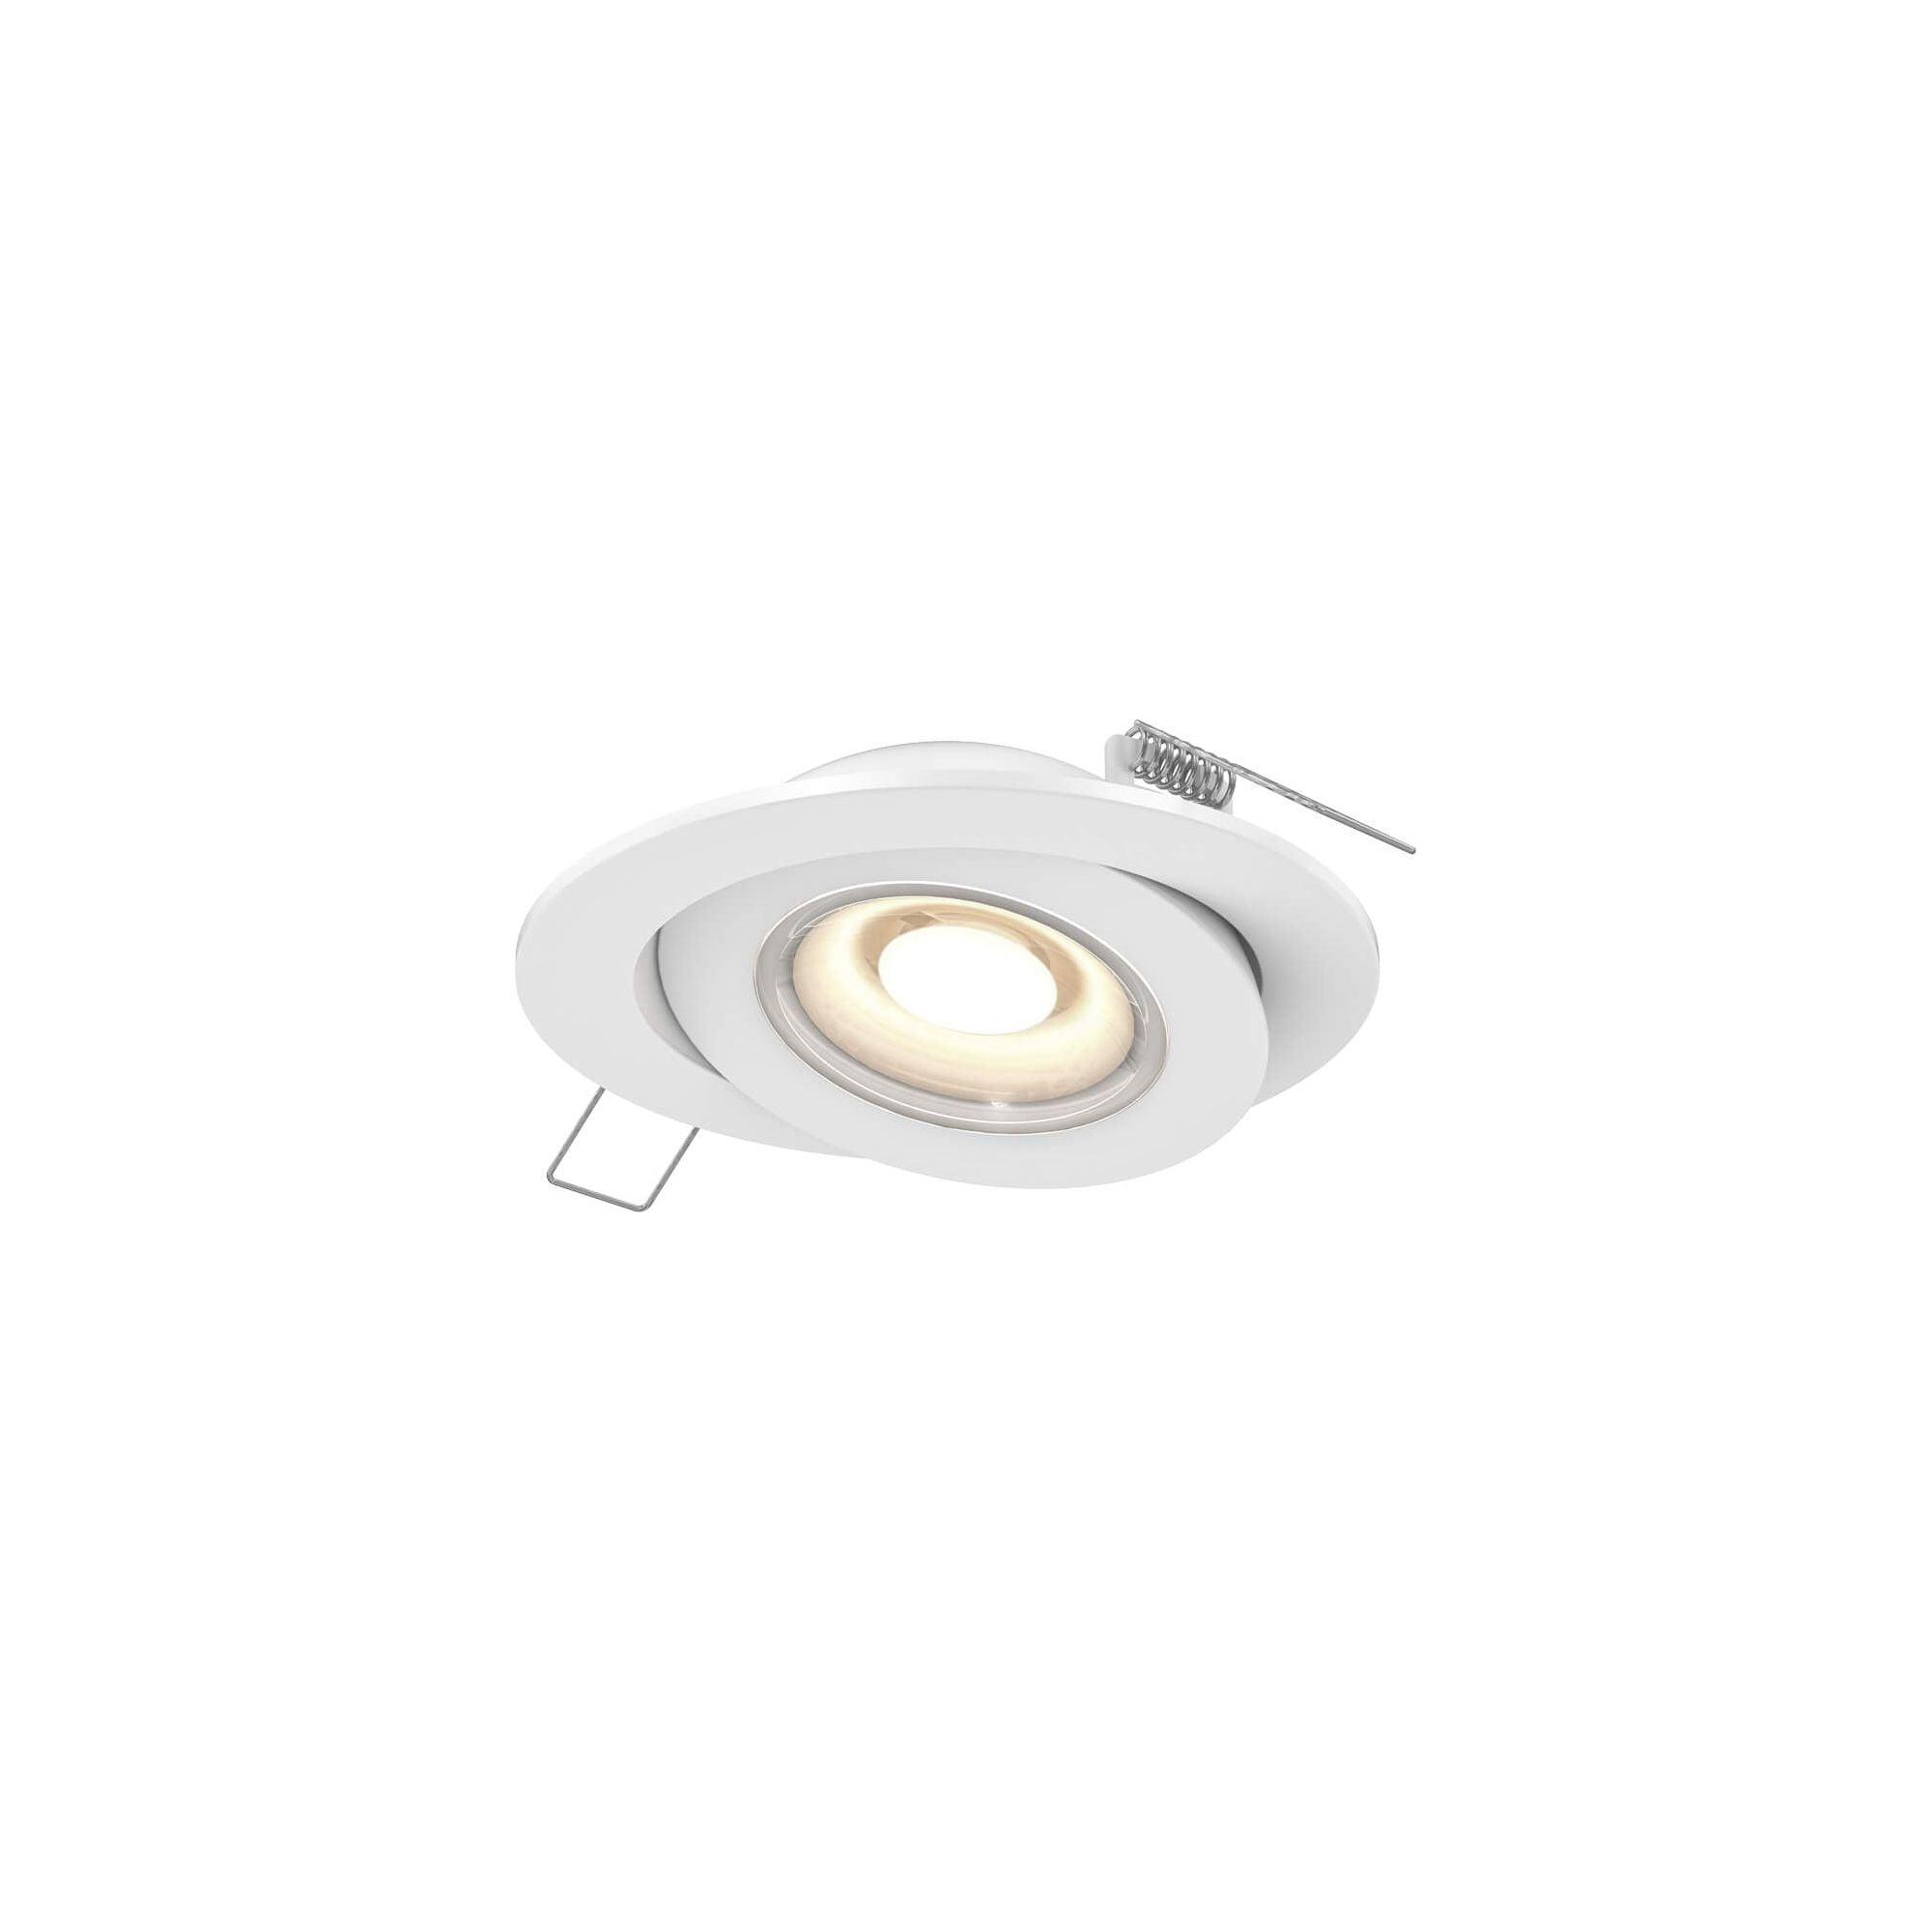 DALS - Flat Recessed Led Gimbal Light - Lights Canada